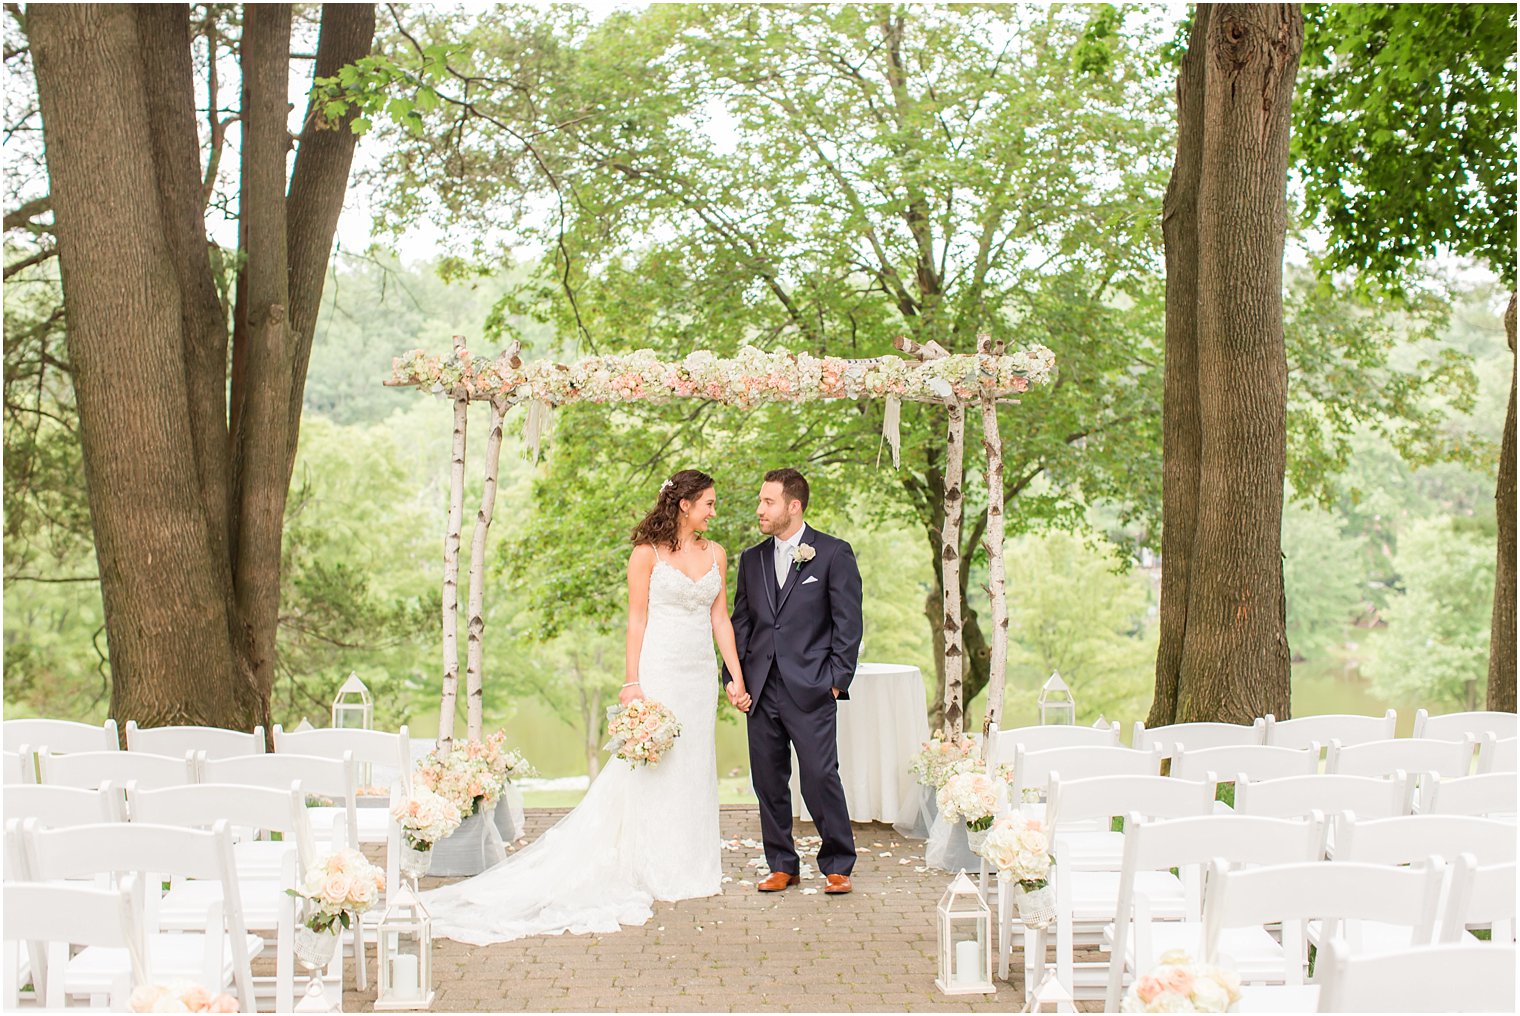 Bride and groom under the chuppah